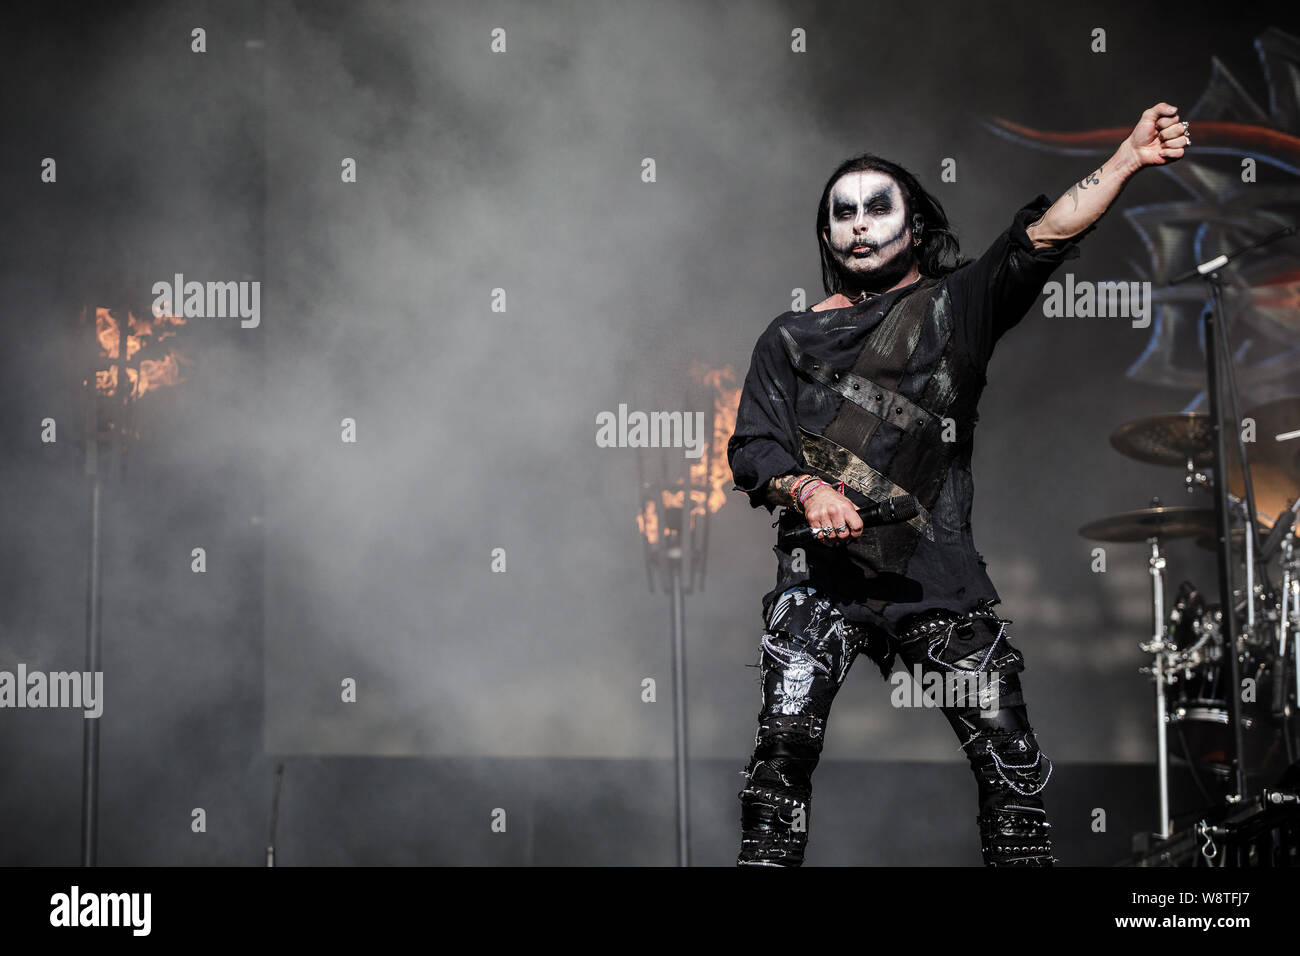 Cradle Of Filth perform live on stage at Bloodstock Open Air Festival, UK, 11th Aug, 2019. Stock Photo